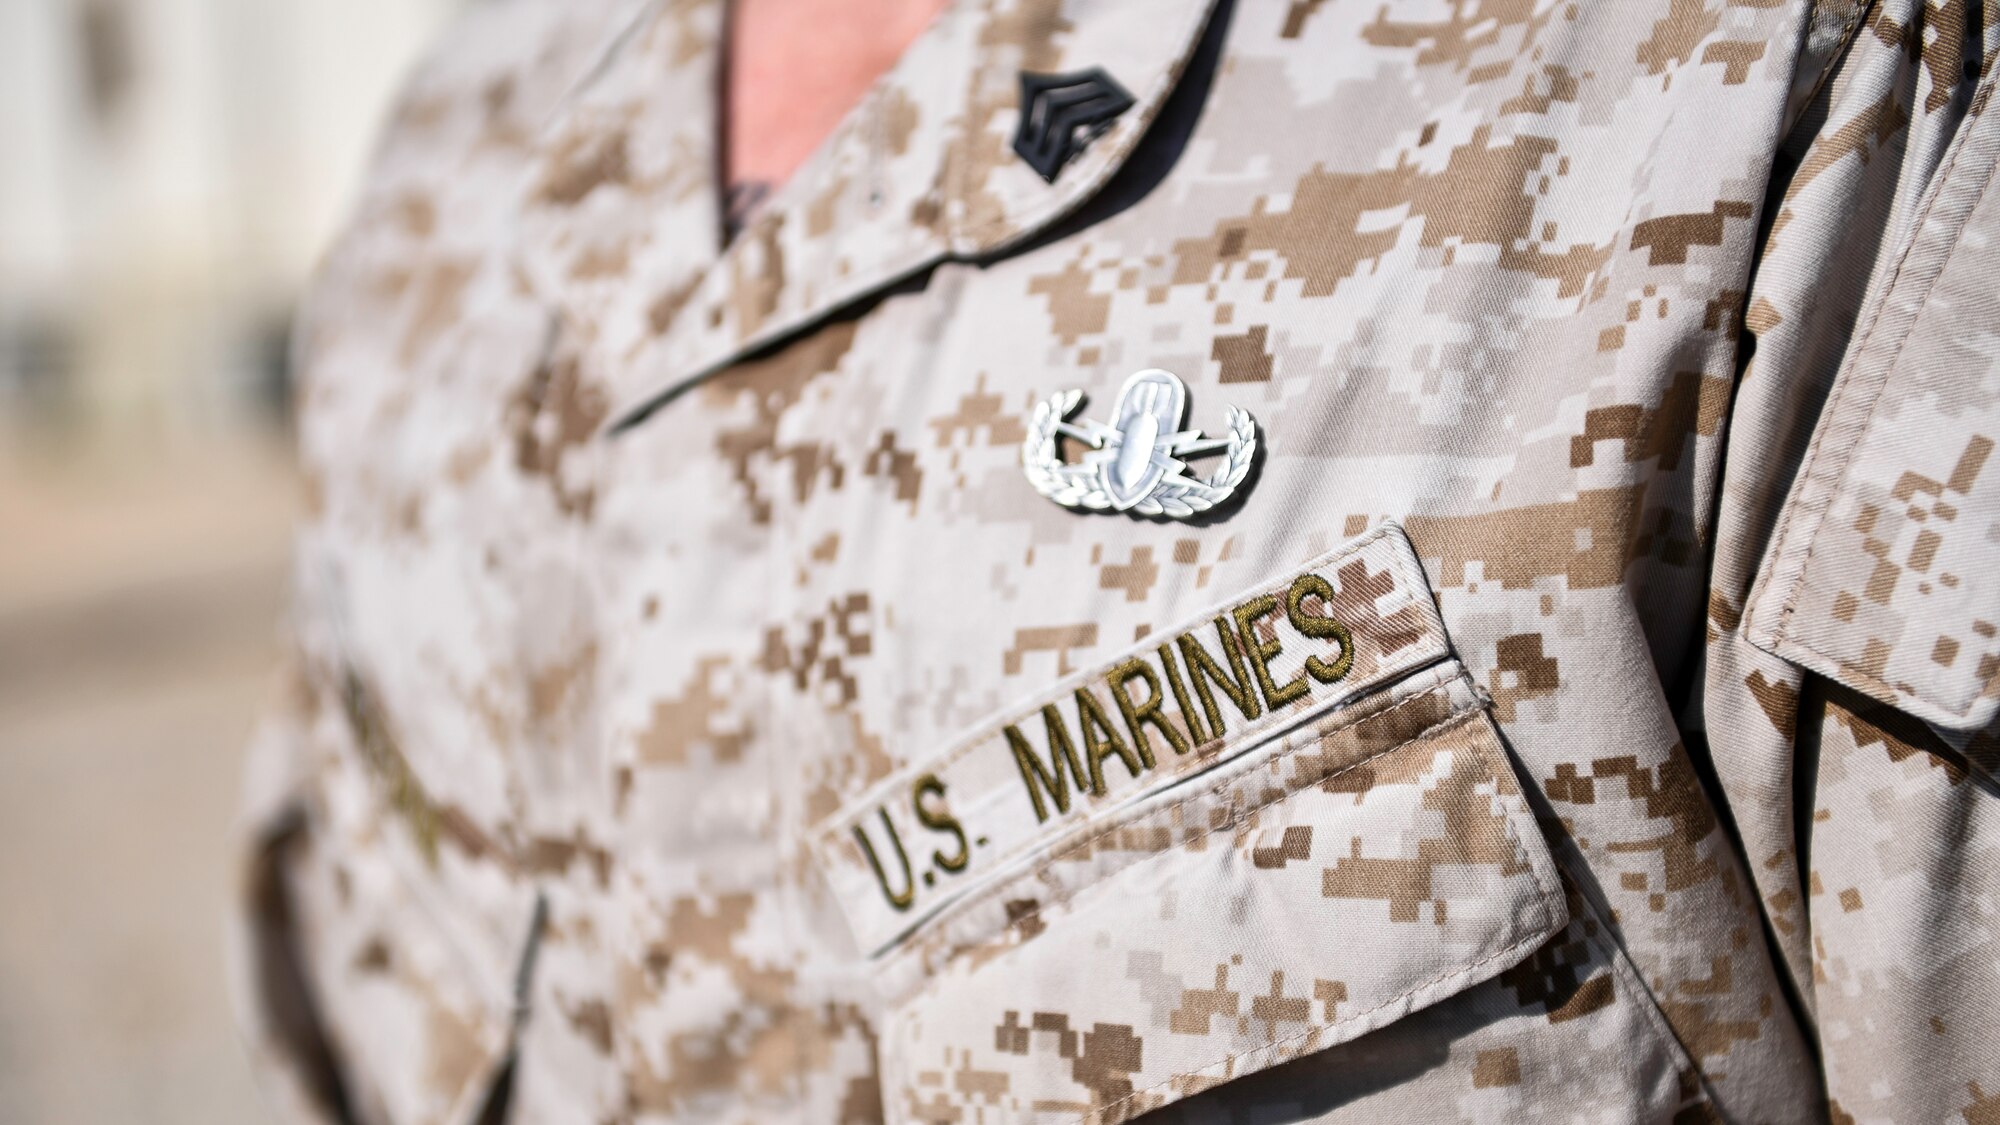 A U.S. Marine Corps uniform tape is photographed at Ahmed Al Jaber Air Base, Kuwait, Dec. 4, 2019. The corporal’s course, hosted by Special Purpose Marine Air-Ground Task Force, Command Element, is a 14-day formal training event comparable to the Air Force Airman Leadership School normally provided to only Marine corporals to prepare them for leadership as they progress to the next rank. However, the course was also made available to qualified Airmen participants also stationed at the air base